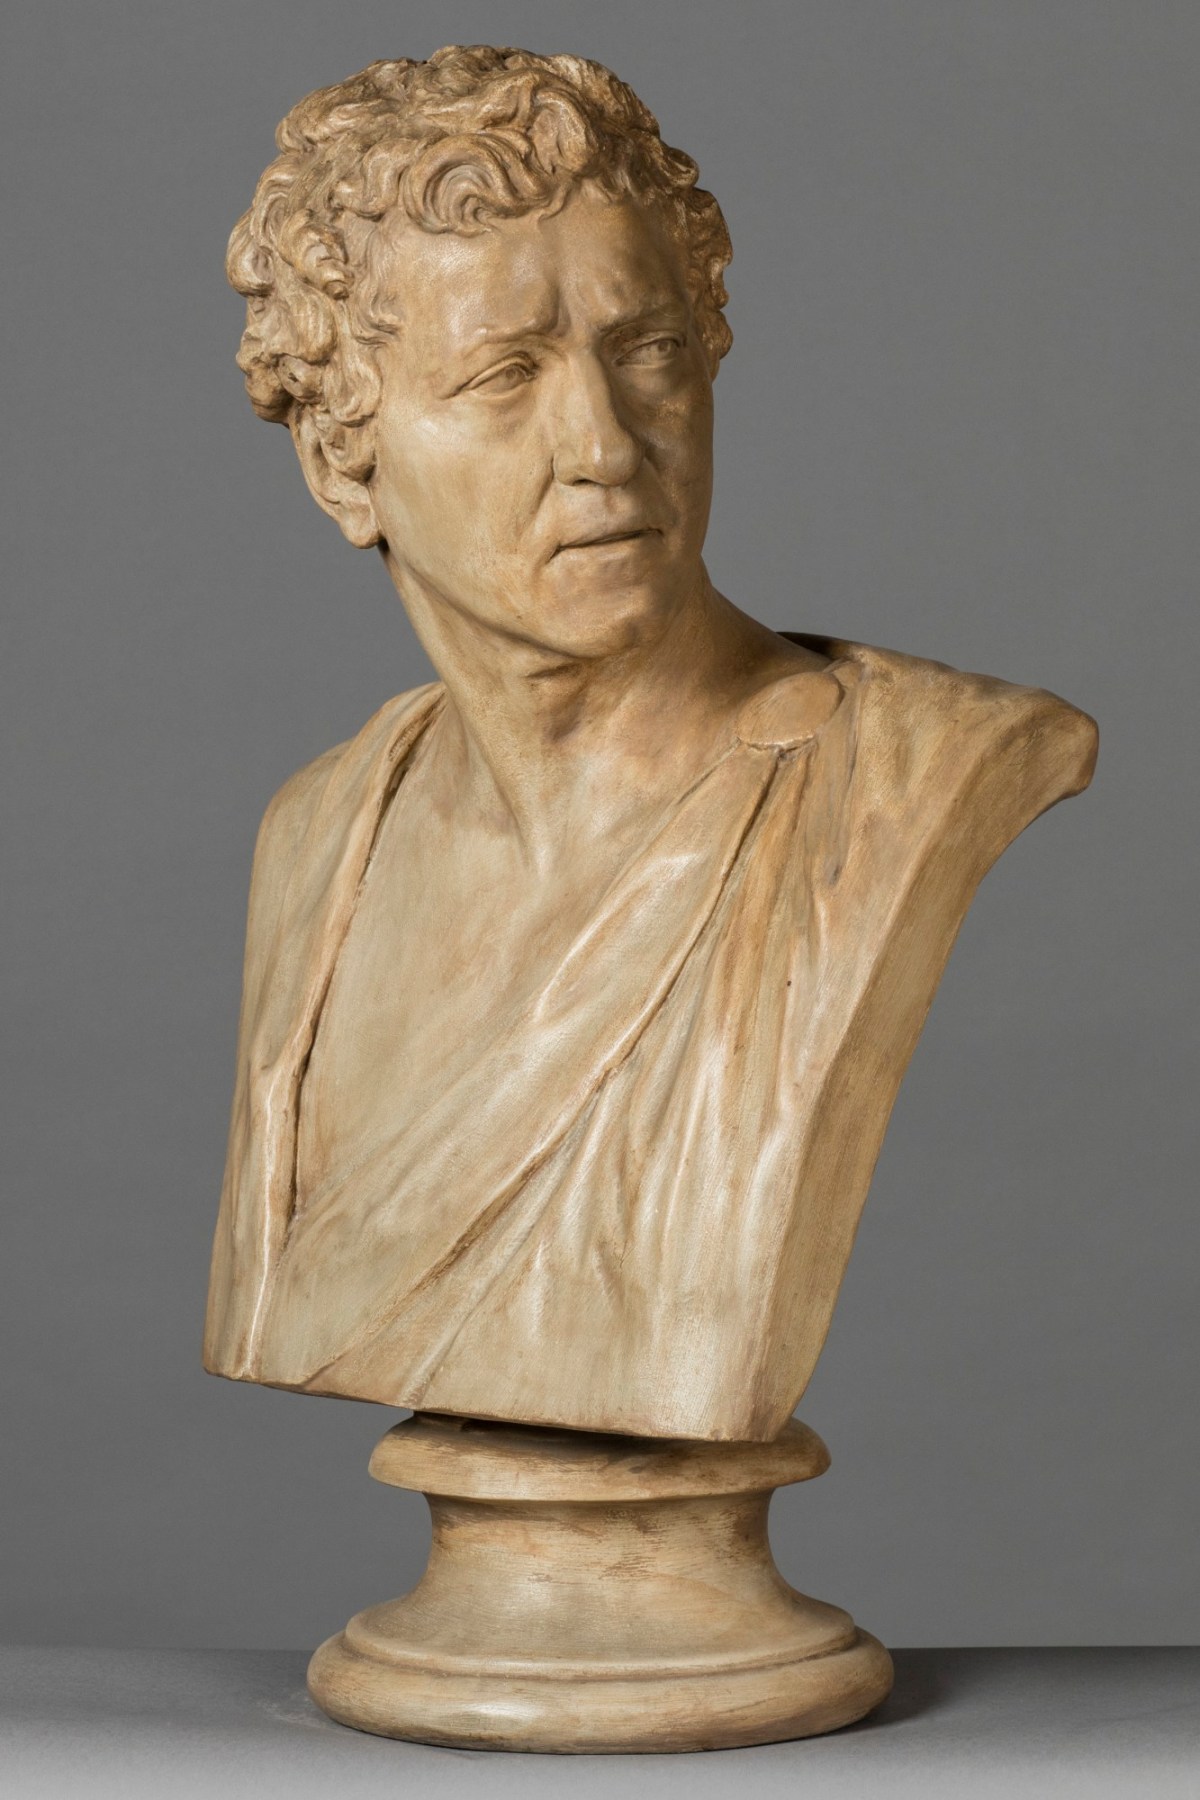 Cast of a bust of Sir Joshua Reynolds, P.R.A., Works of Art, RA  Collection